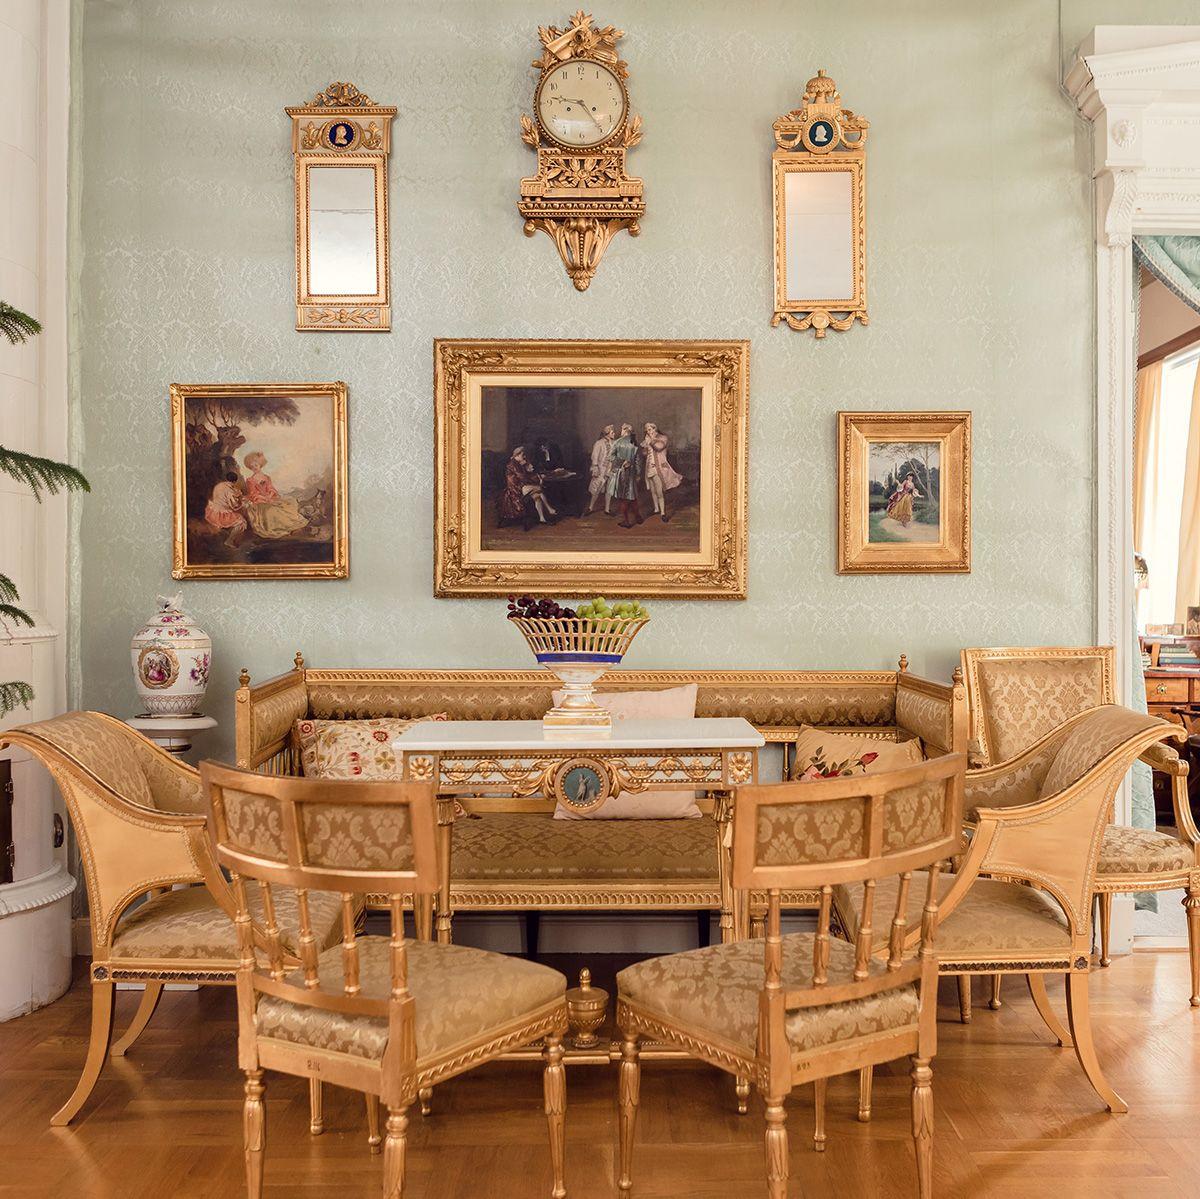 An elegant room at Ett Hem, featuring gold-coloured chairs and gold-framed paintings.